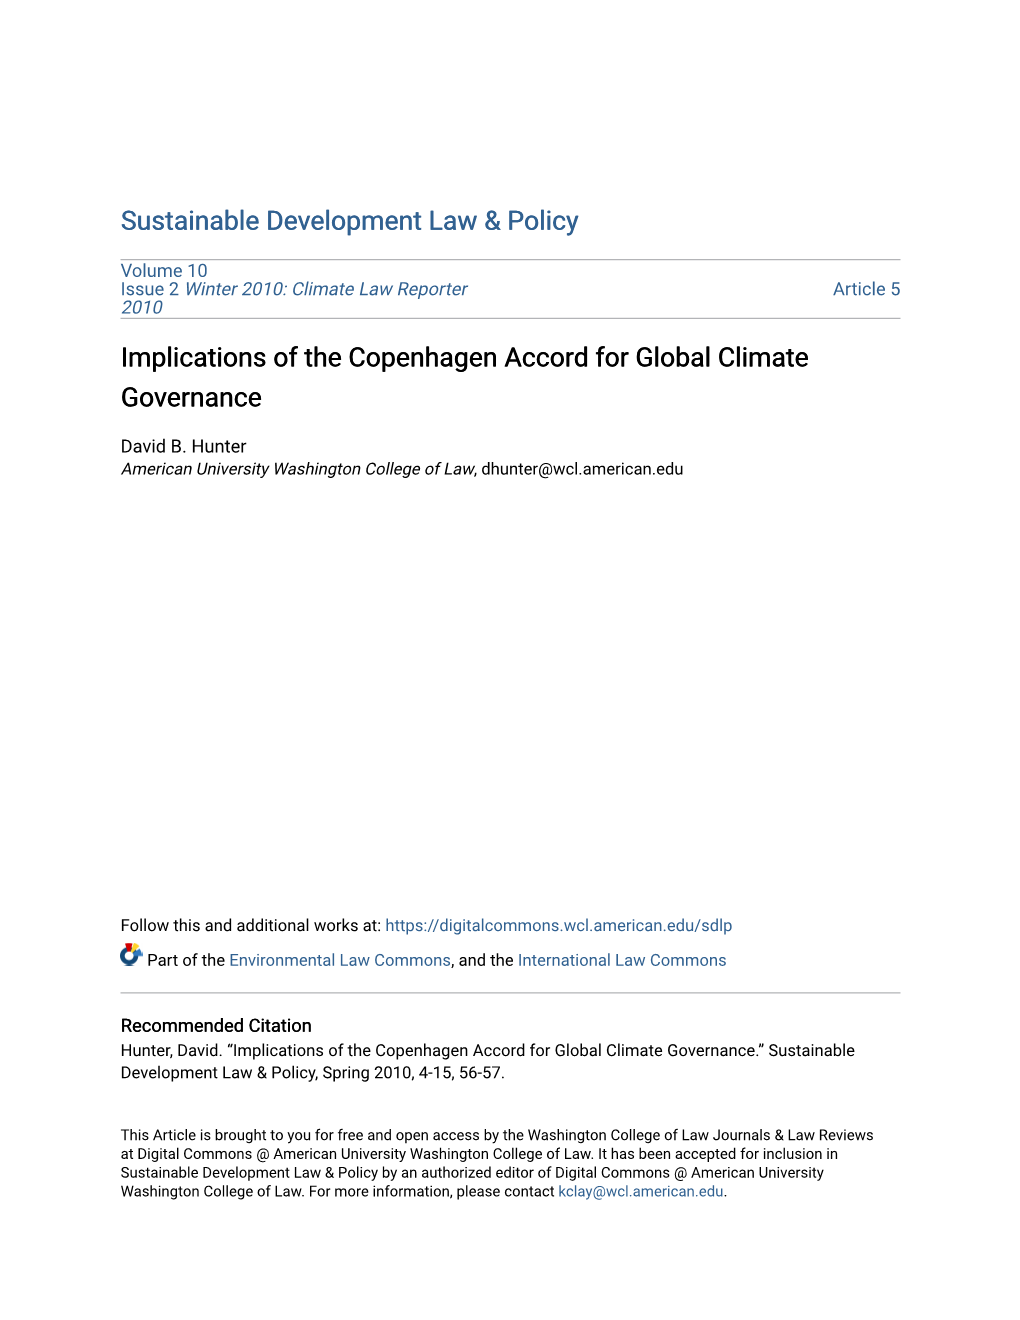 Implications of the Copenhagen Accord for Global Climate Governance